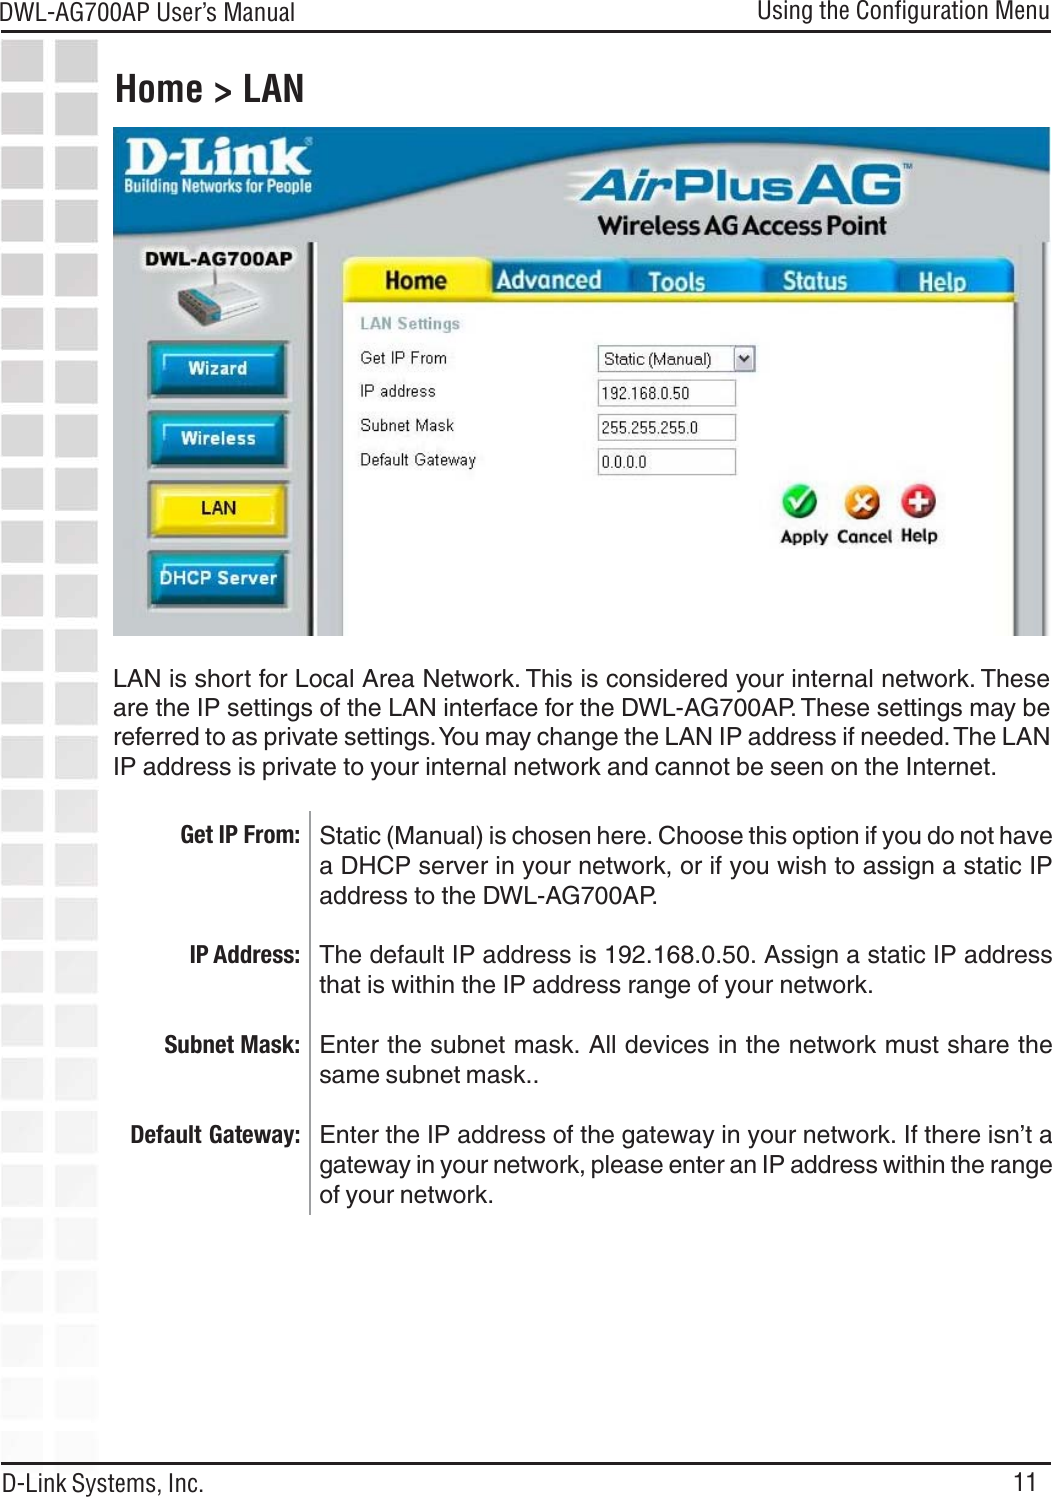 11DWL-AG700AP User’s ManualD-Link Systems, Inc.Home &gt; LANStatic (Manual) is chosen here. Choose this option if you do not havea DHCP server in your network, or if you wish to assign a static IPaddress to the DWL-AG700AP.The default IP address is 192.168.0.50. Assign a static IP addressthat is within the IP address range of your network.Enter the subnet mask. All devices in the network must share thesame subnet mask..Enter the IP address of the gateway in your network. If there isn’t agateway in your network, please enter an IP address within the rangeof your network.Using the Configuration MenuGet IP From:IP Address:Subnet Mask:Default Gateway:LAN is short for Local Area Network. This is considered your internal network. Theseare the IP settings of the LAN interface for the DWL-AG700AP. These settings may bereferred to as private settings. You may change the LAN IP address if needed. The LANIP address is private to your internal network and cannot be seen on the Internet.